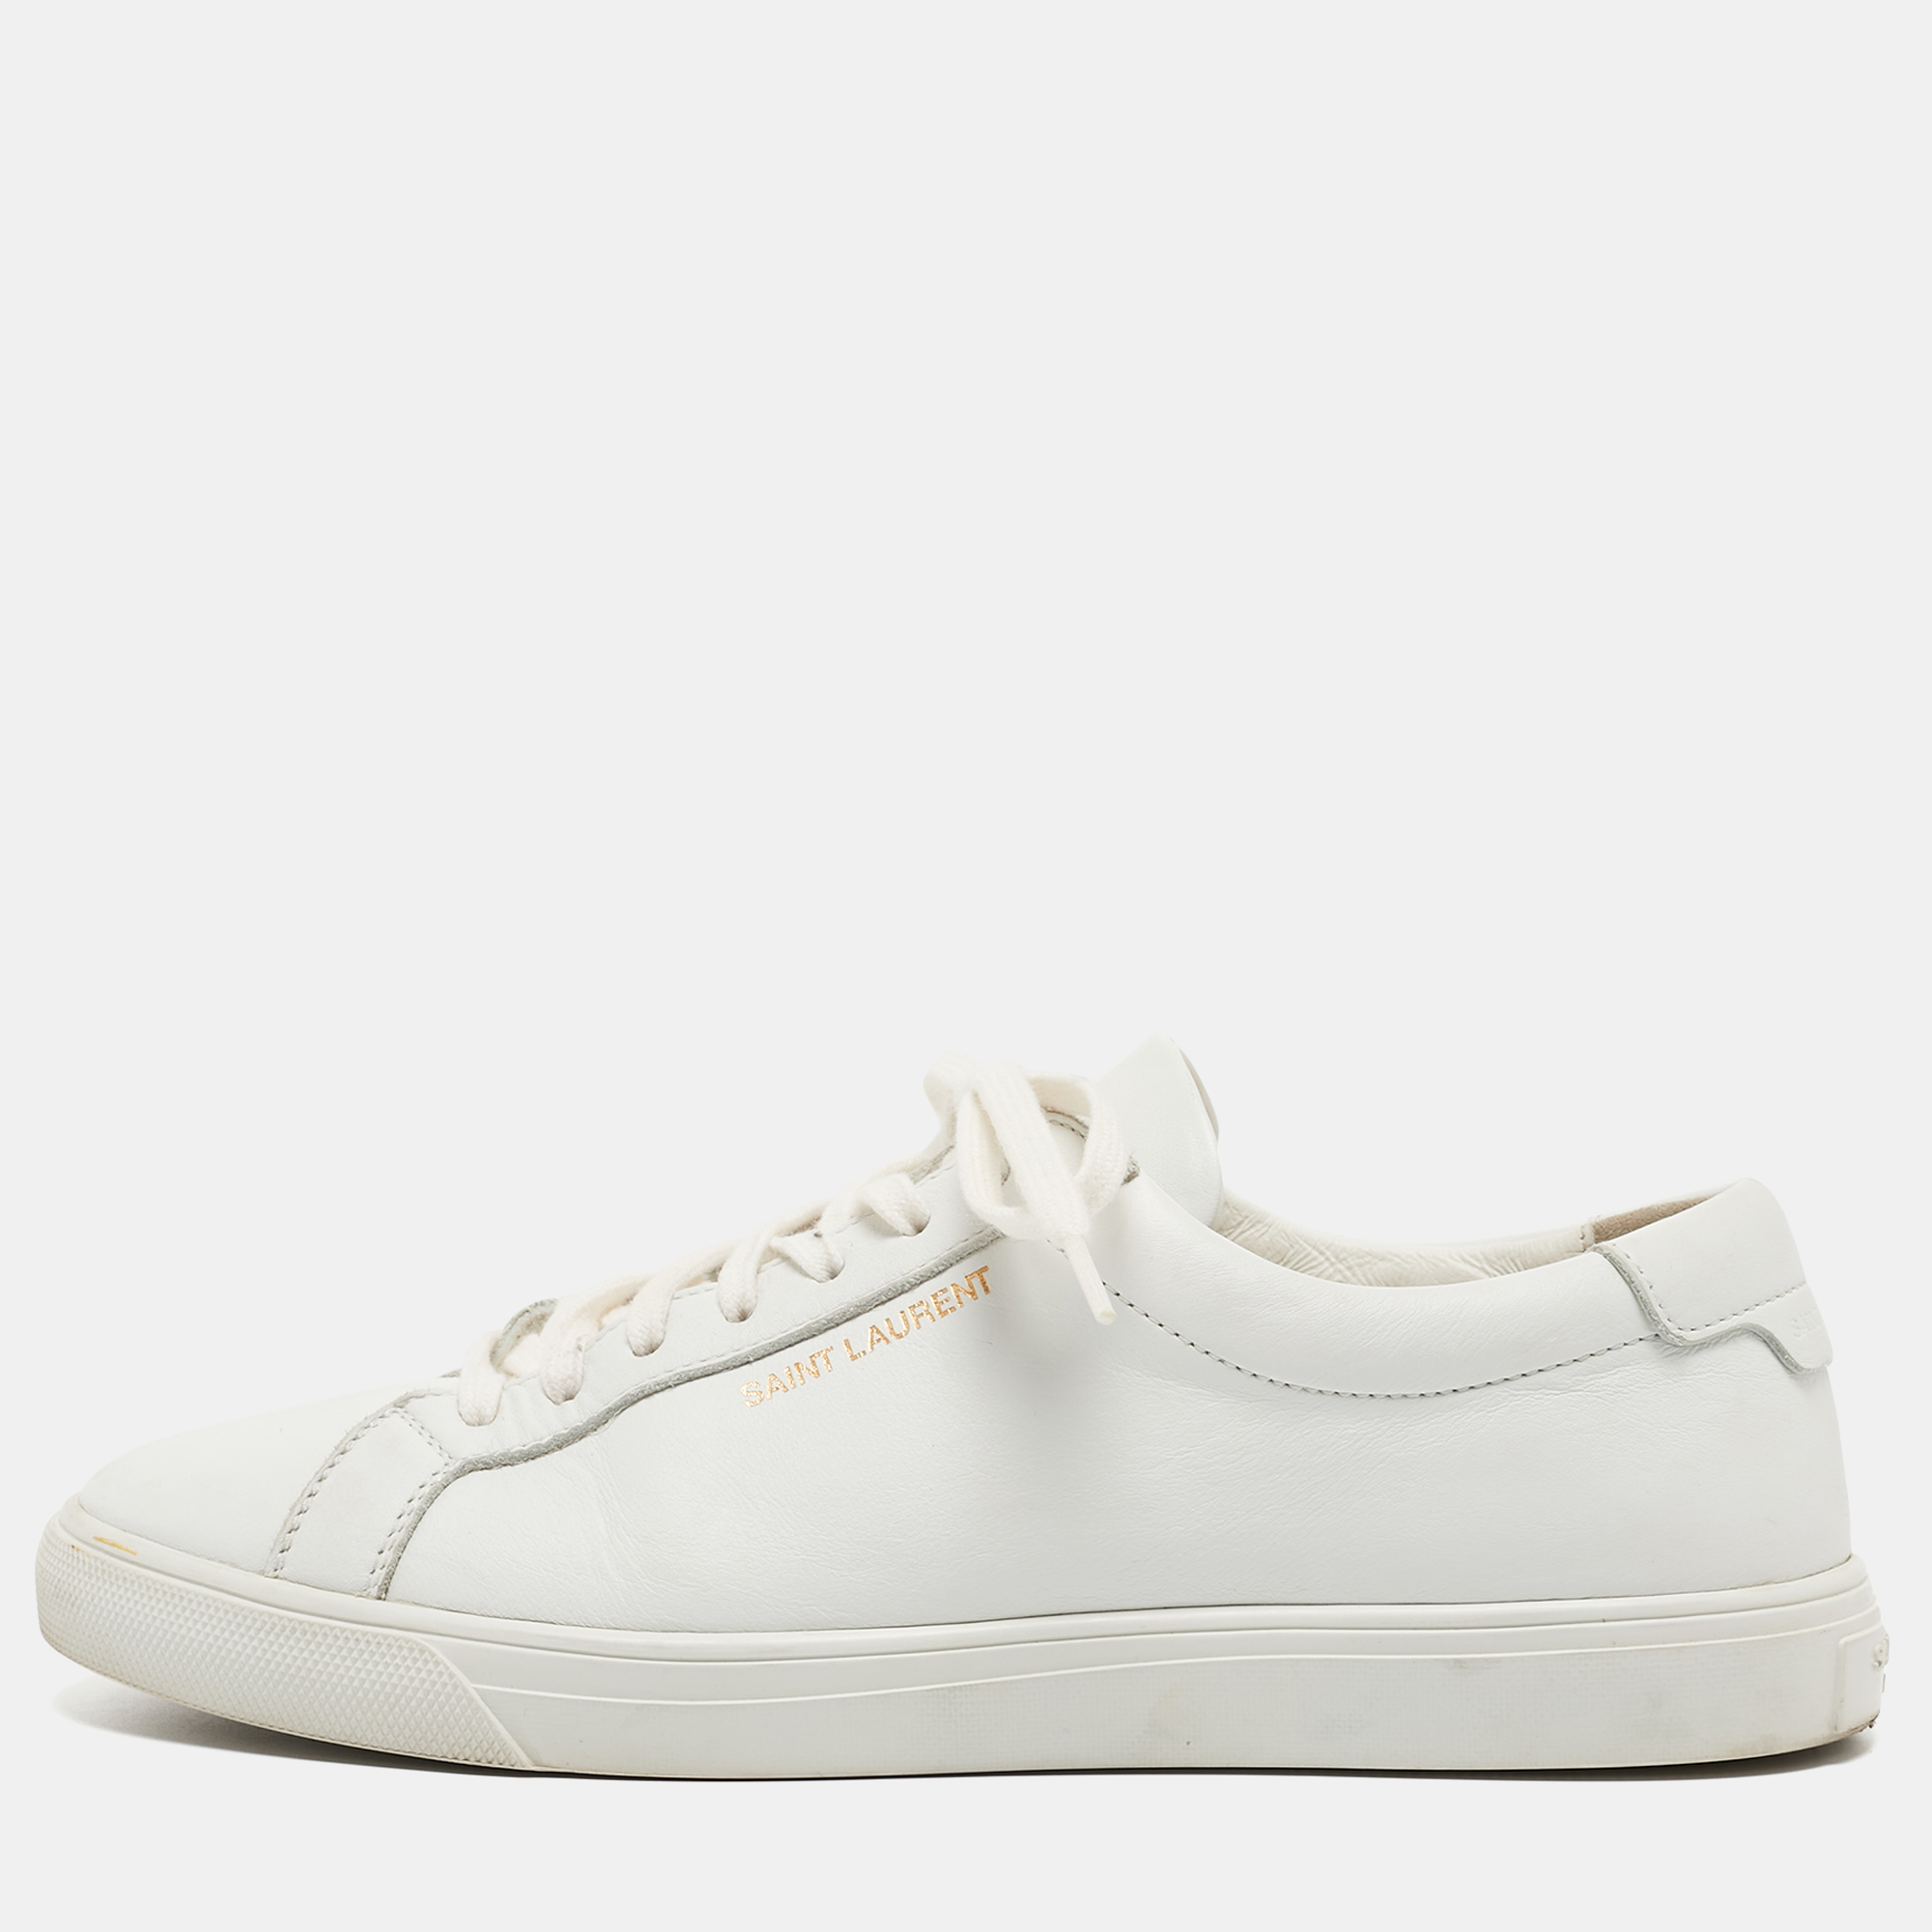 Upgrade your style with these Saint Laurent white sneakers. Meticulously designed for fashion and comfort theyre the ideal choice for a trendy and comfortable stride.